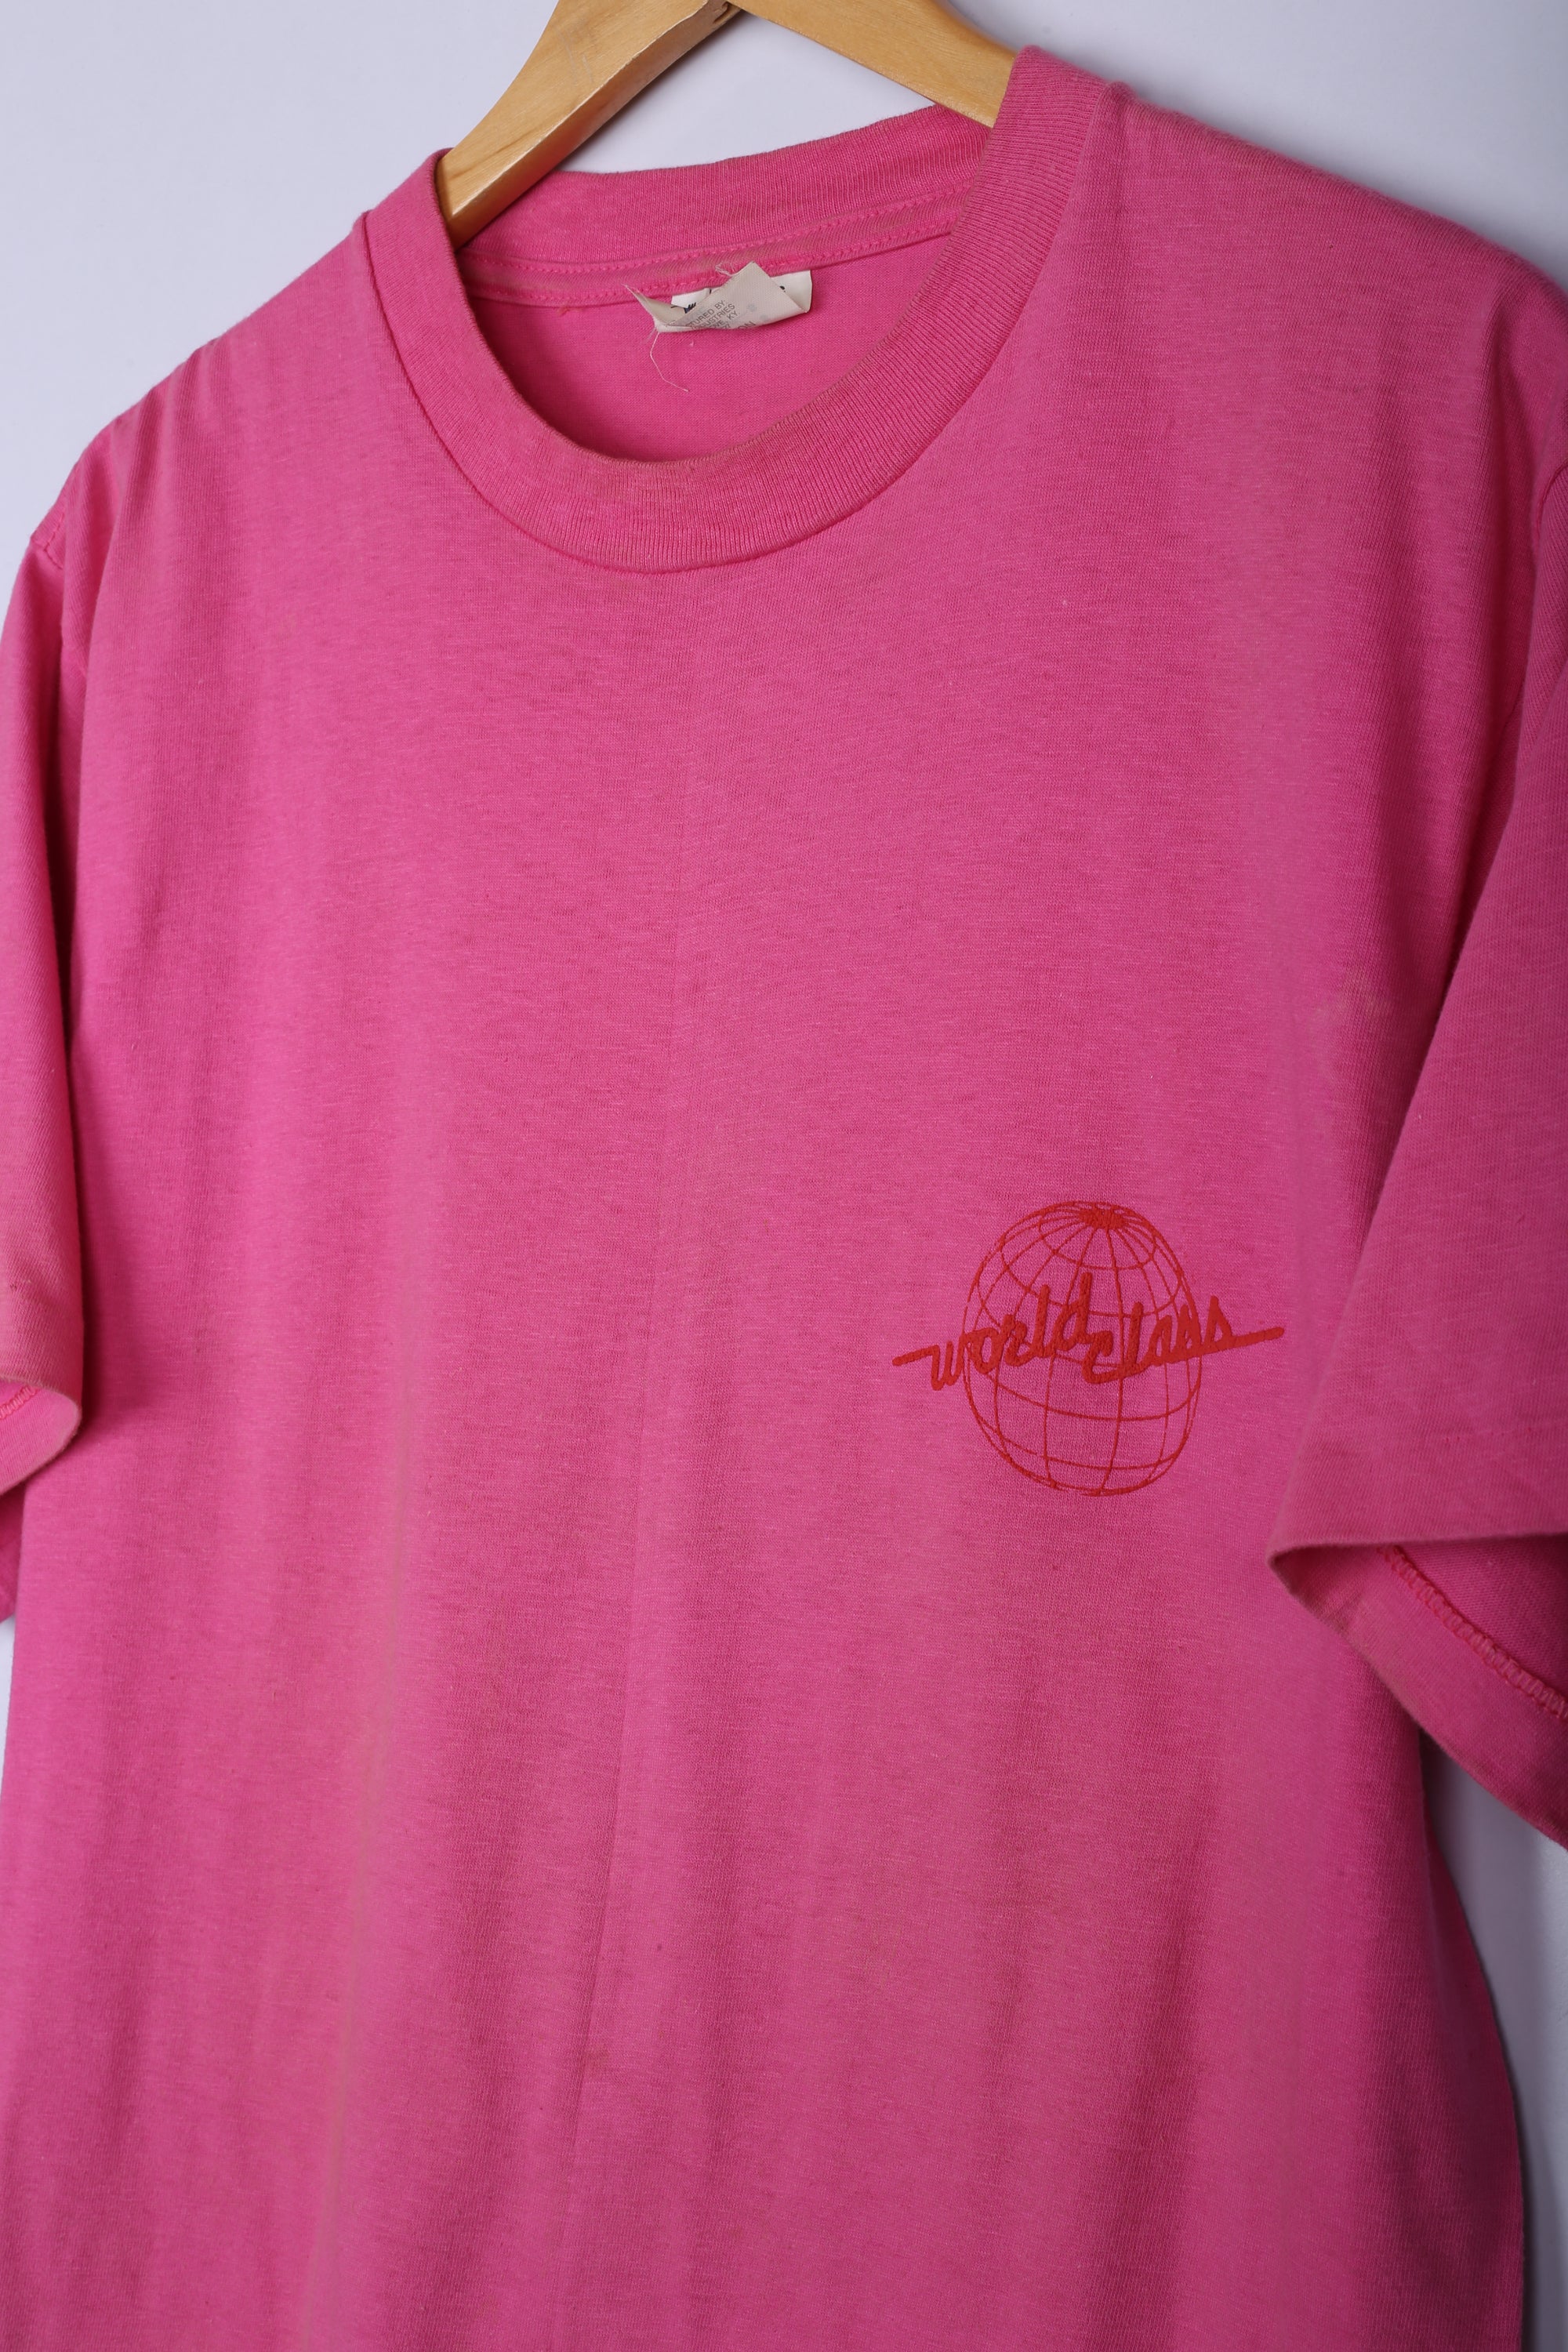 Vintage World Class Graphic Tee Pink